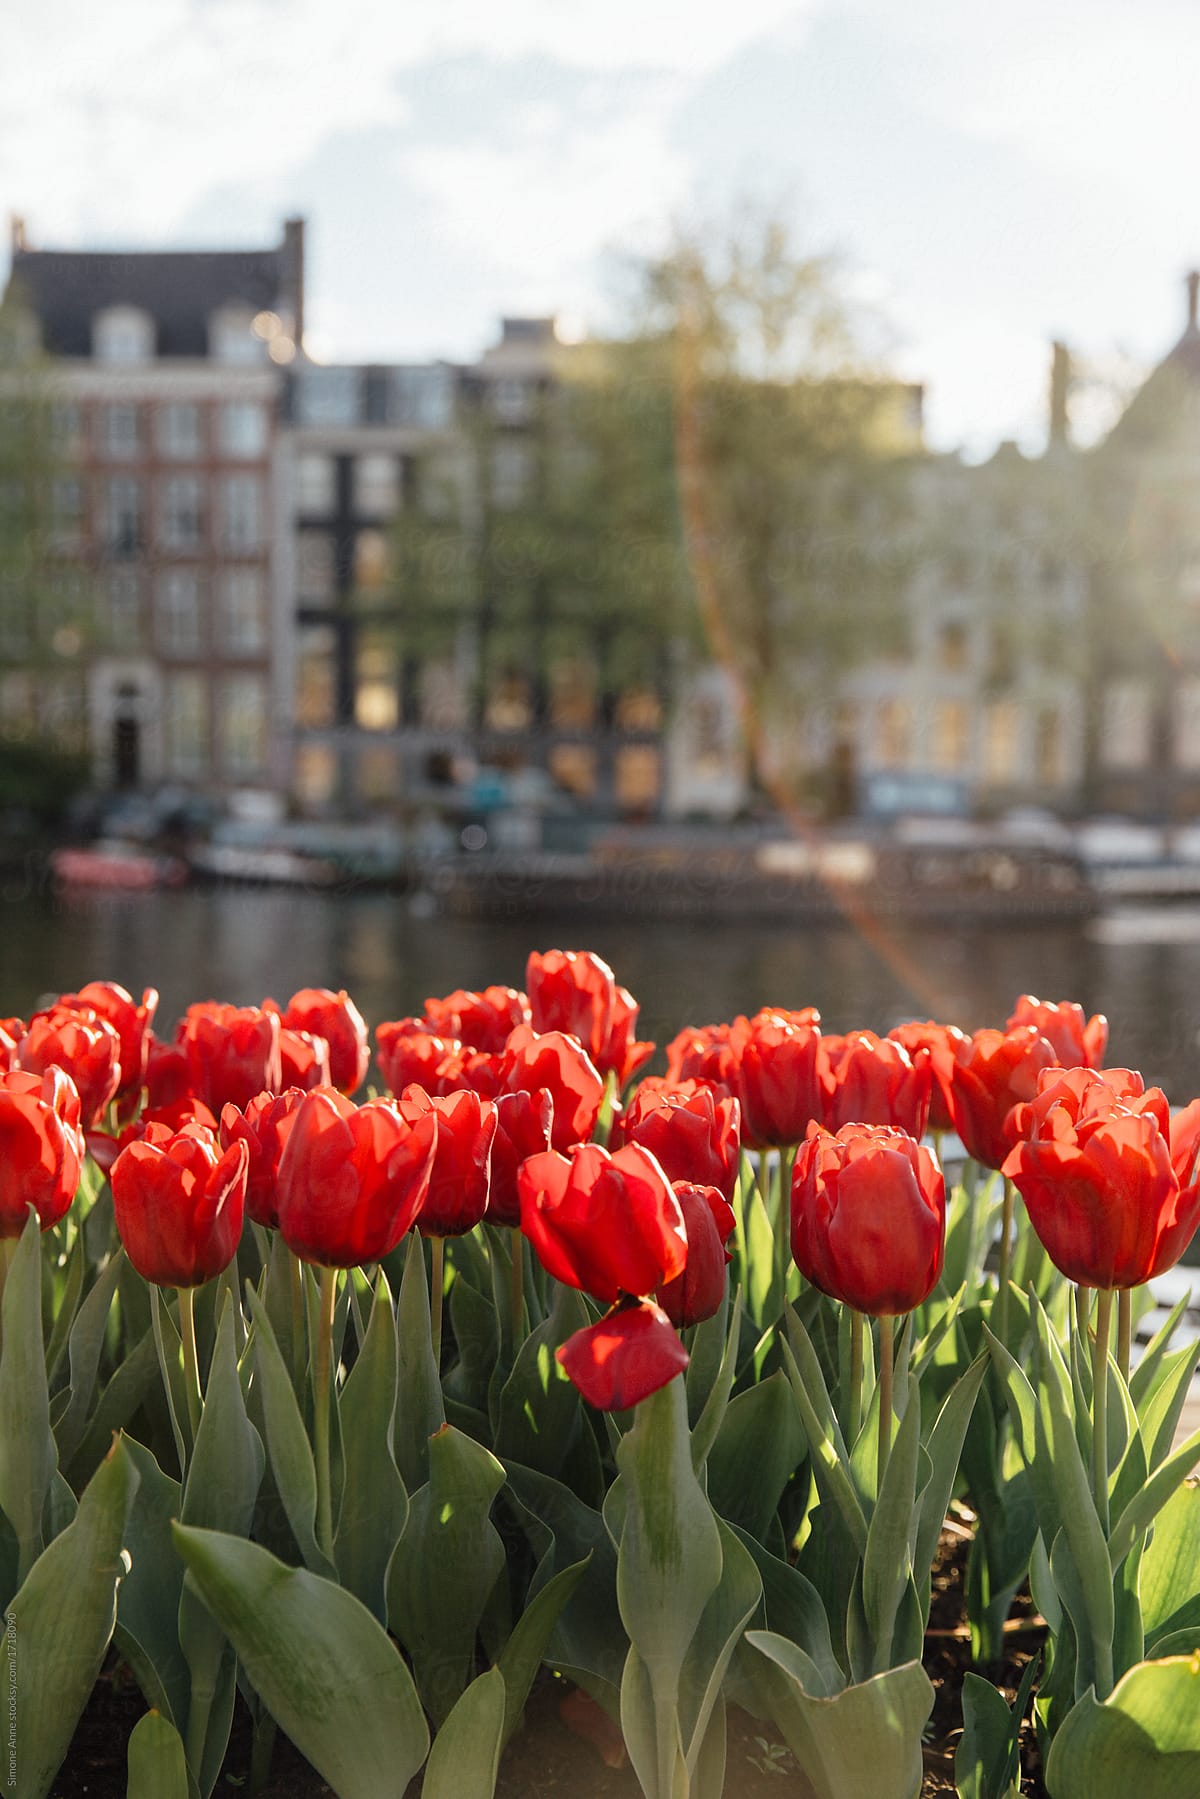 Red tulips in front of a canal and buildings in Amsterdam, the Netherlands.